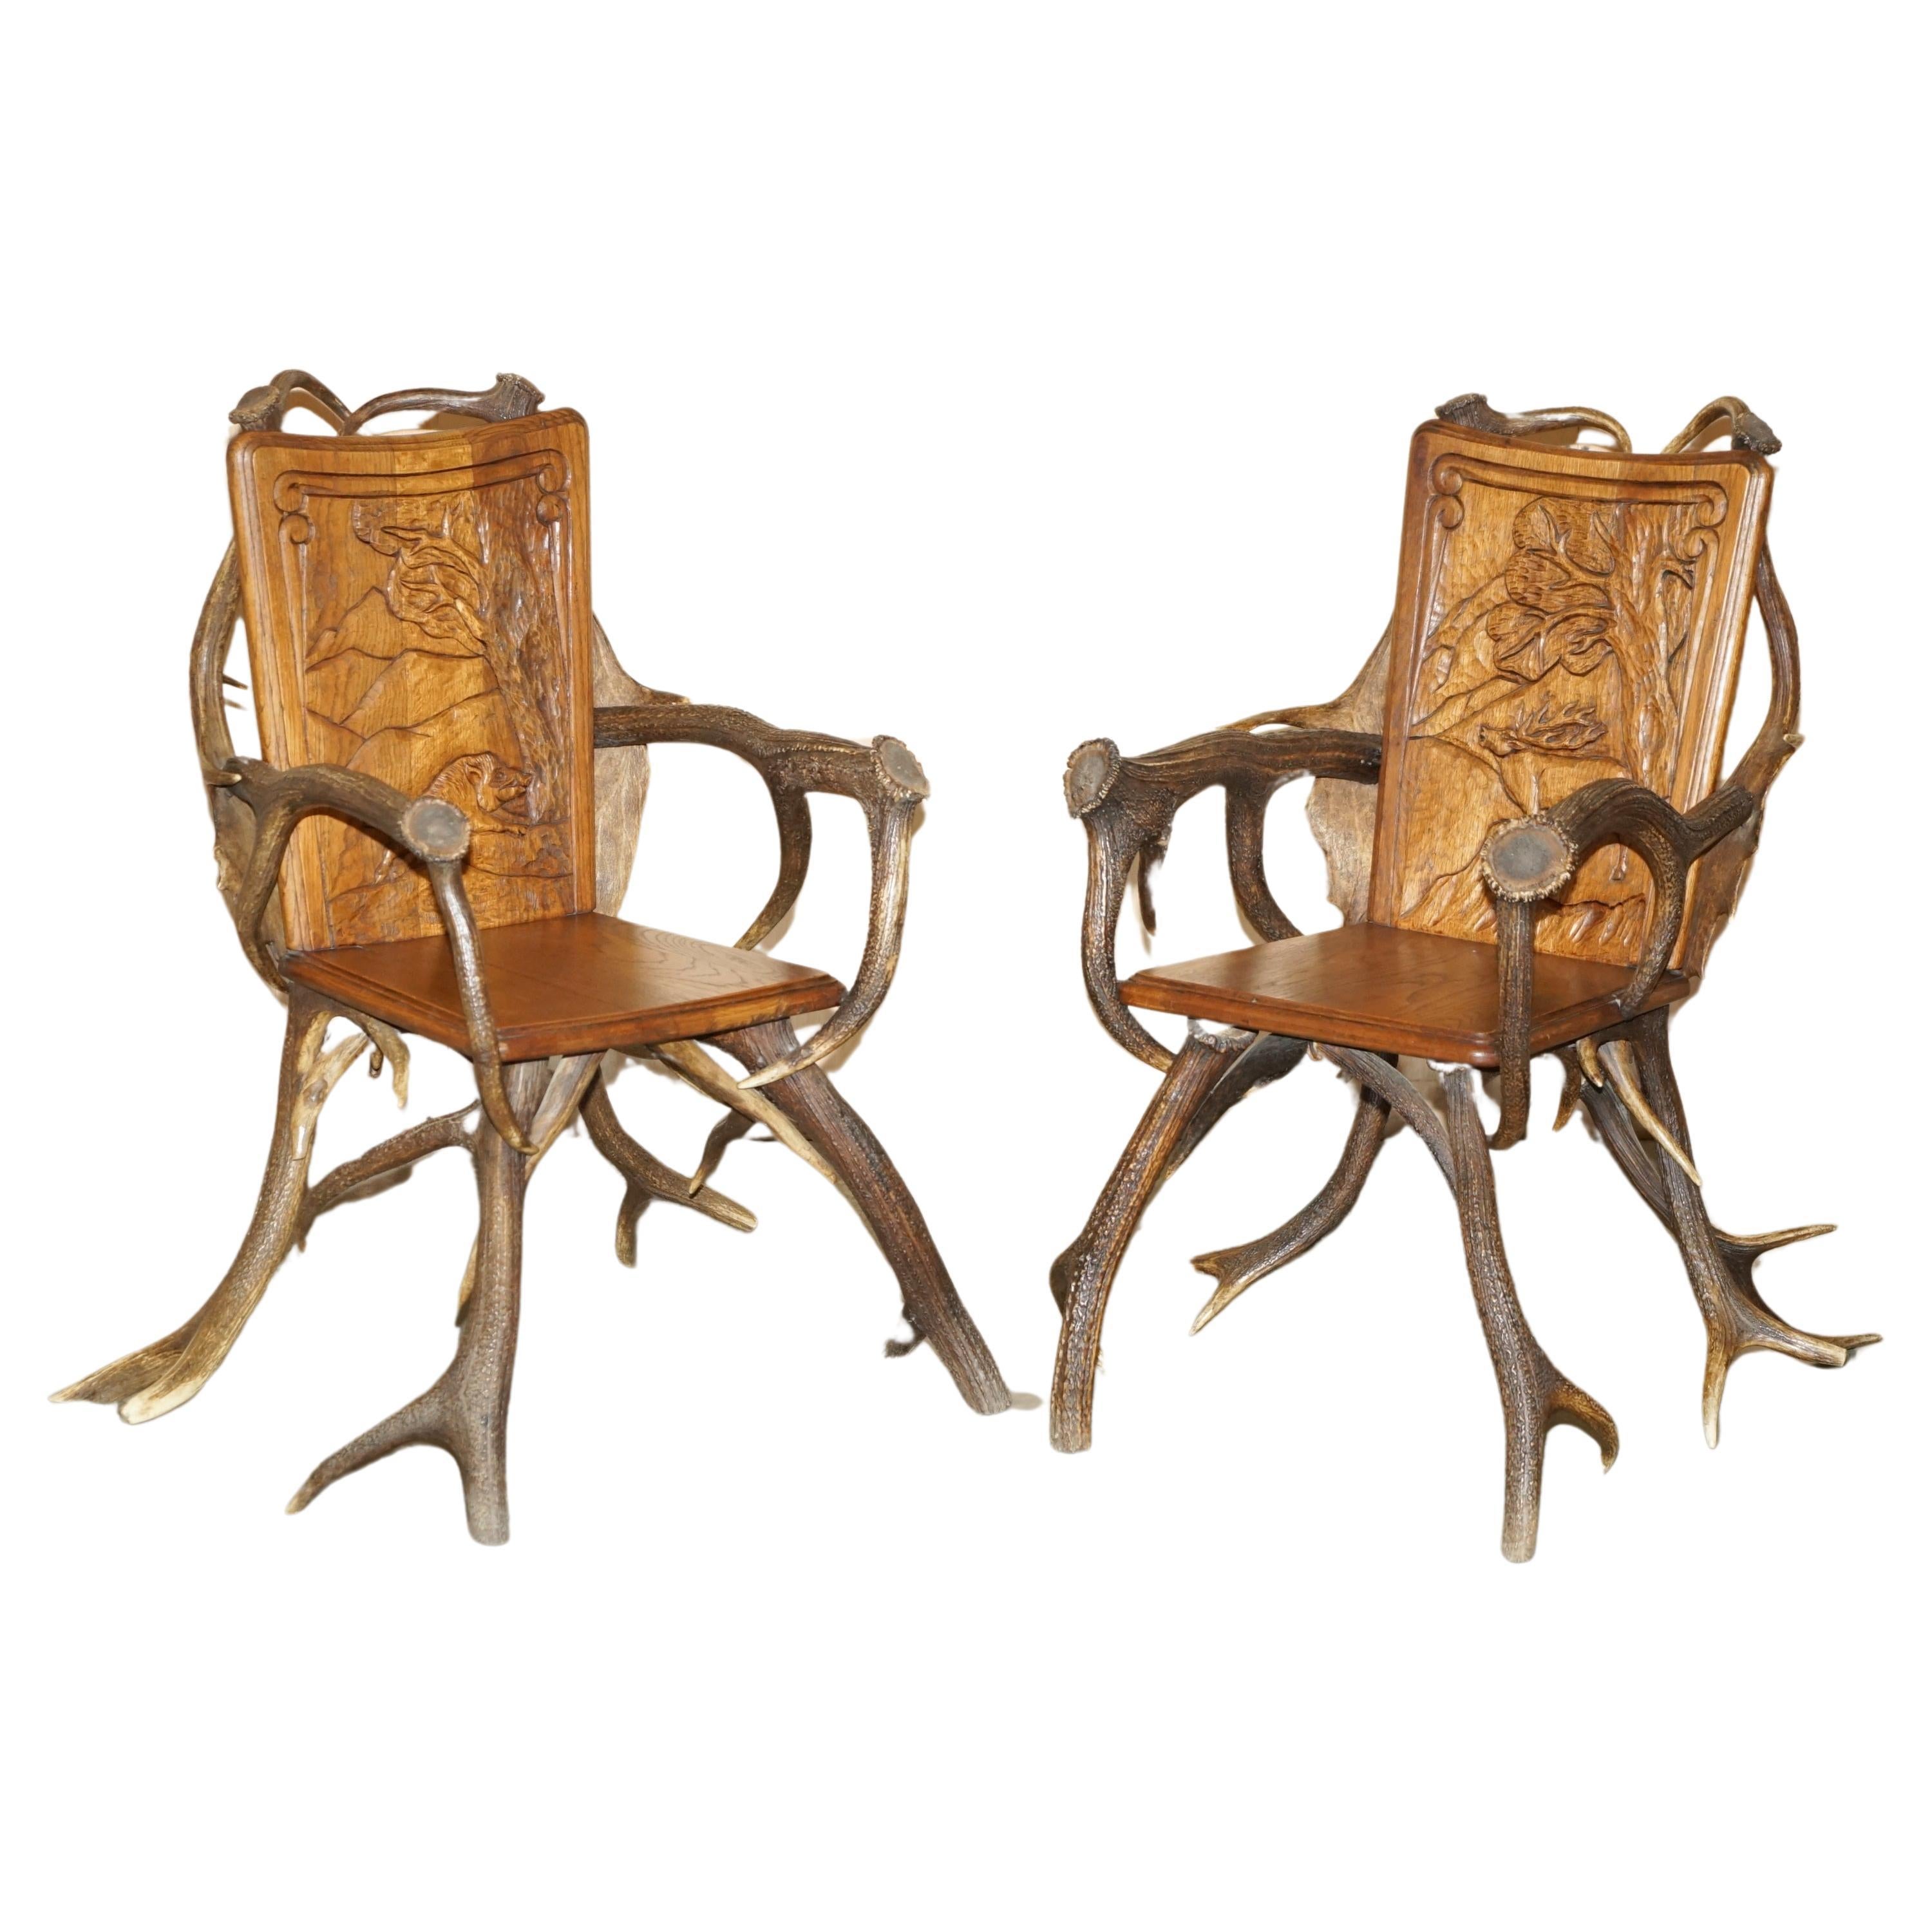 PAIR OF ANTIQUE GERMAN BLACK FOREST CARVED ANTLER ARMCHAiRS PART OF A SUITE